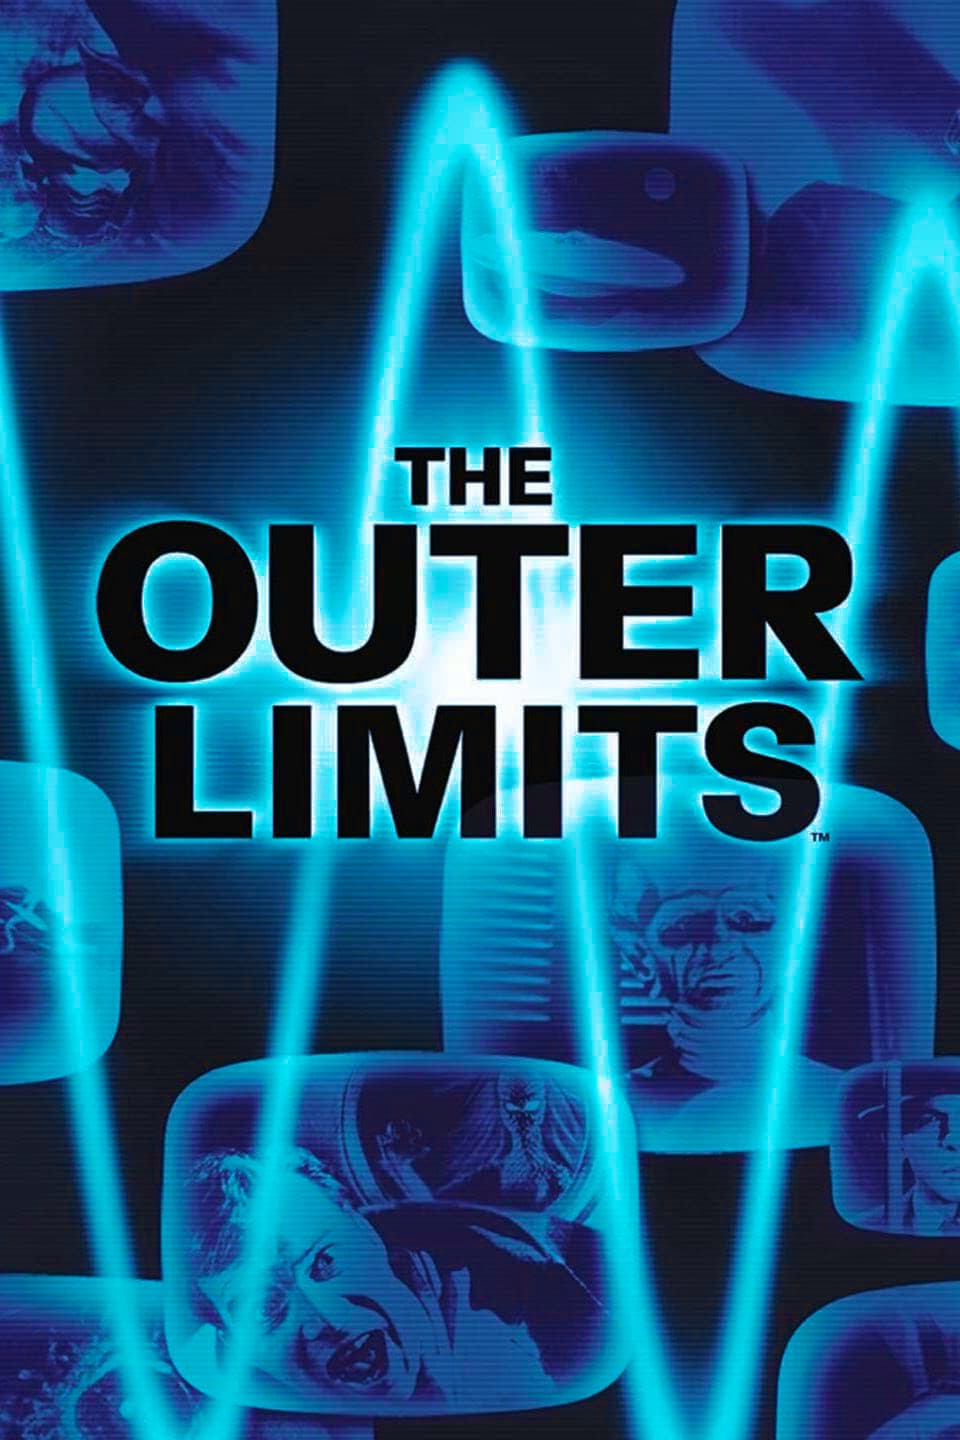 The Outer Limits (TV Series 1963–1965) - Episode list - IMDb